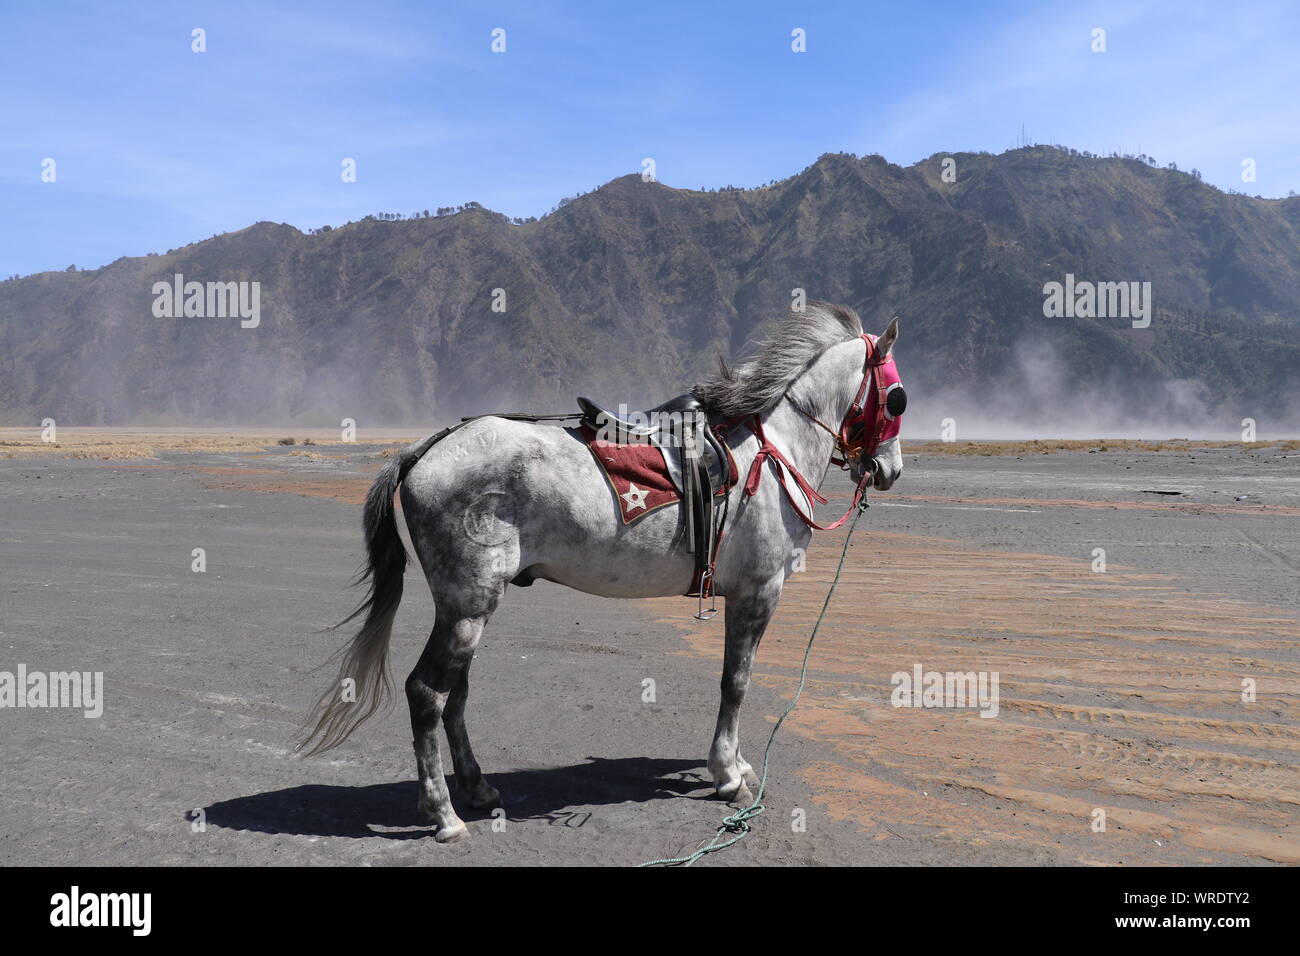 A saddled roan horse stands on a sandy plain with dry grass in the Bromo Valley. Stallion with red harness gazing at a nearby mountain range. Stock Photo